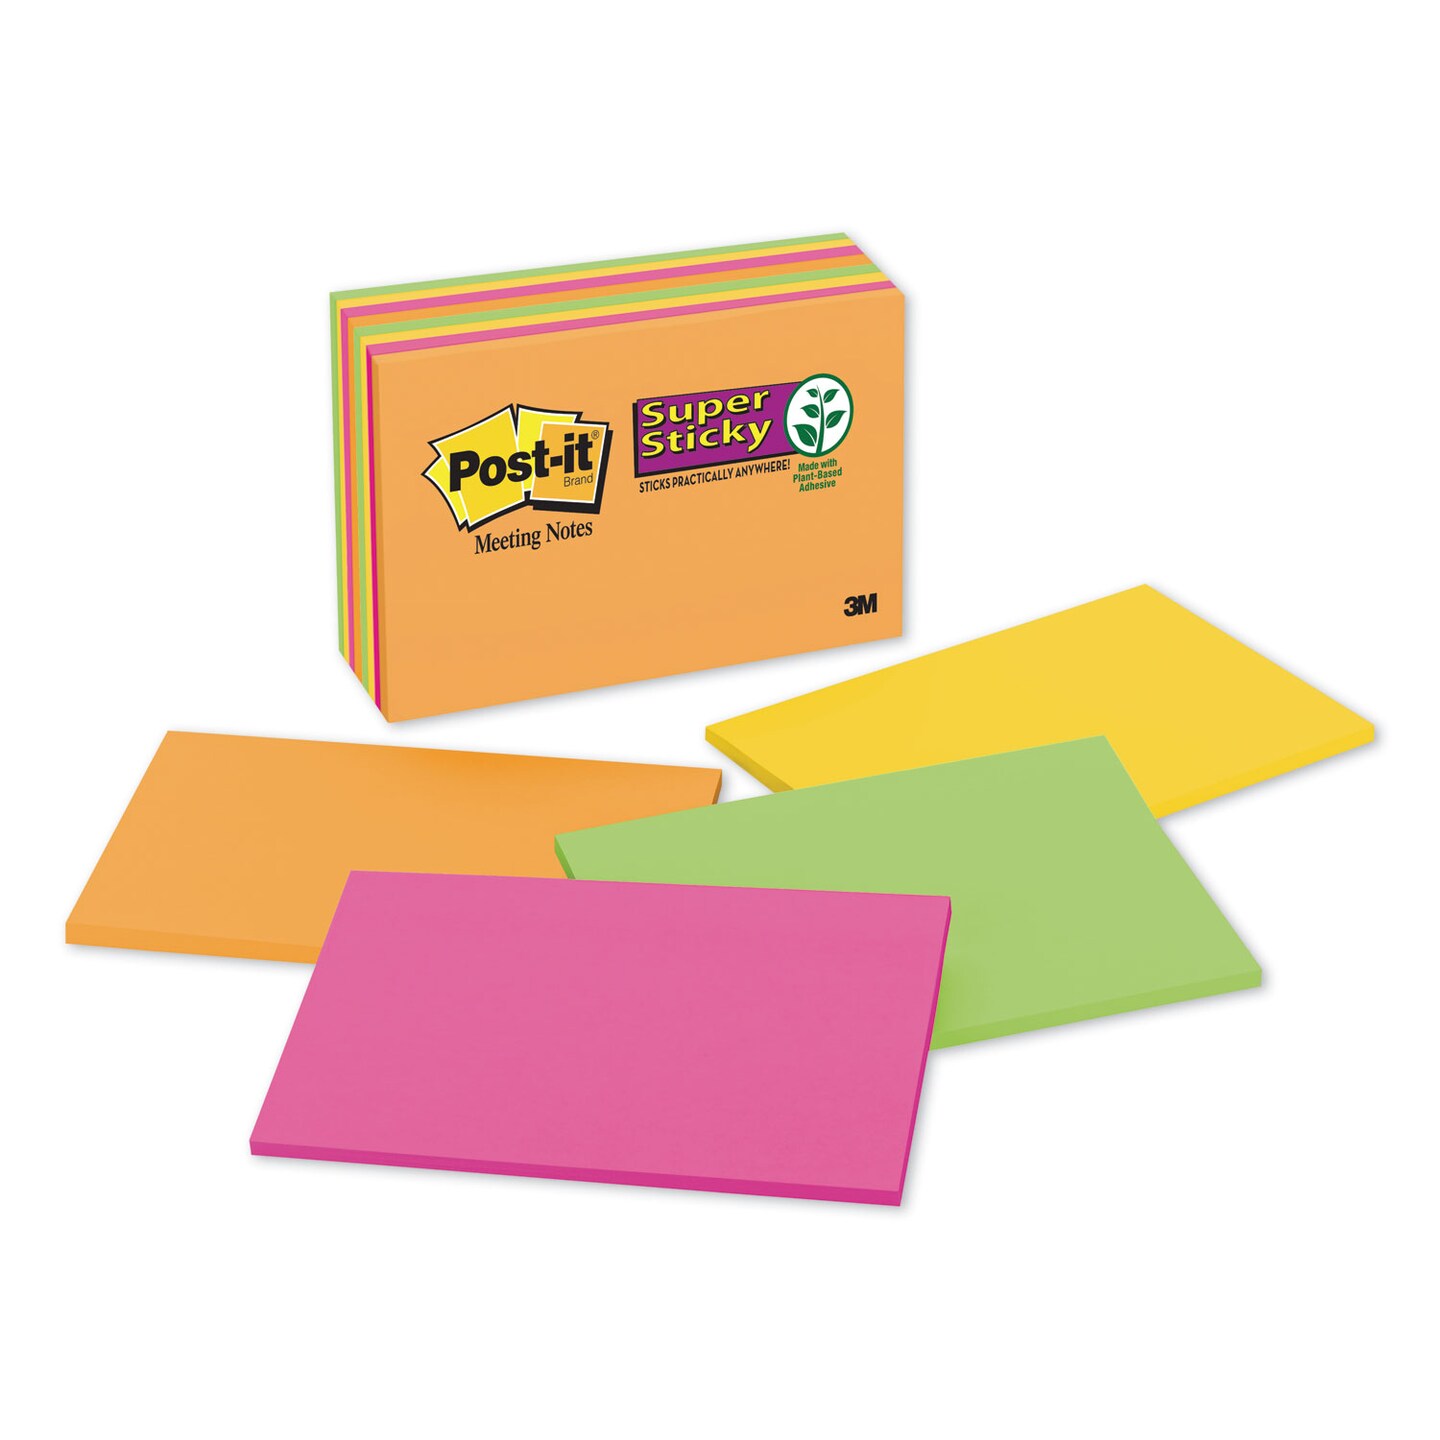 Extra large sticky notes 300mmx300mm for drawing, drafts, presentations,  workshops, brainstorming,50sheets